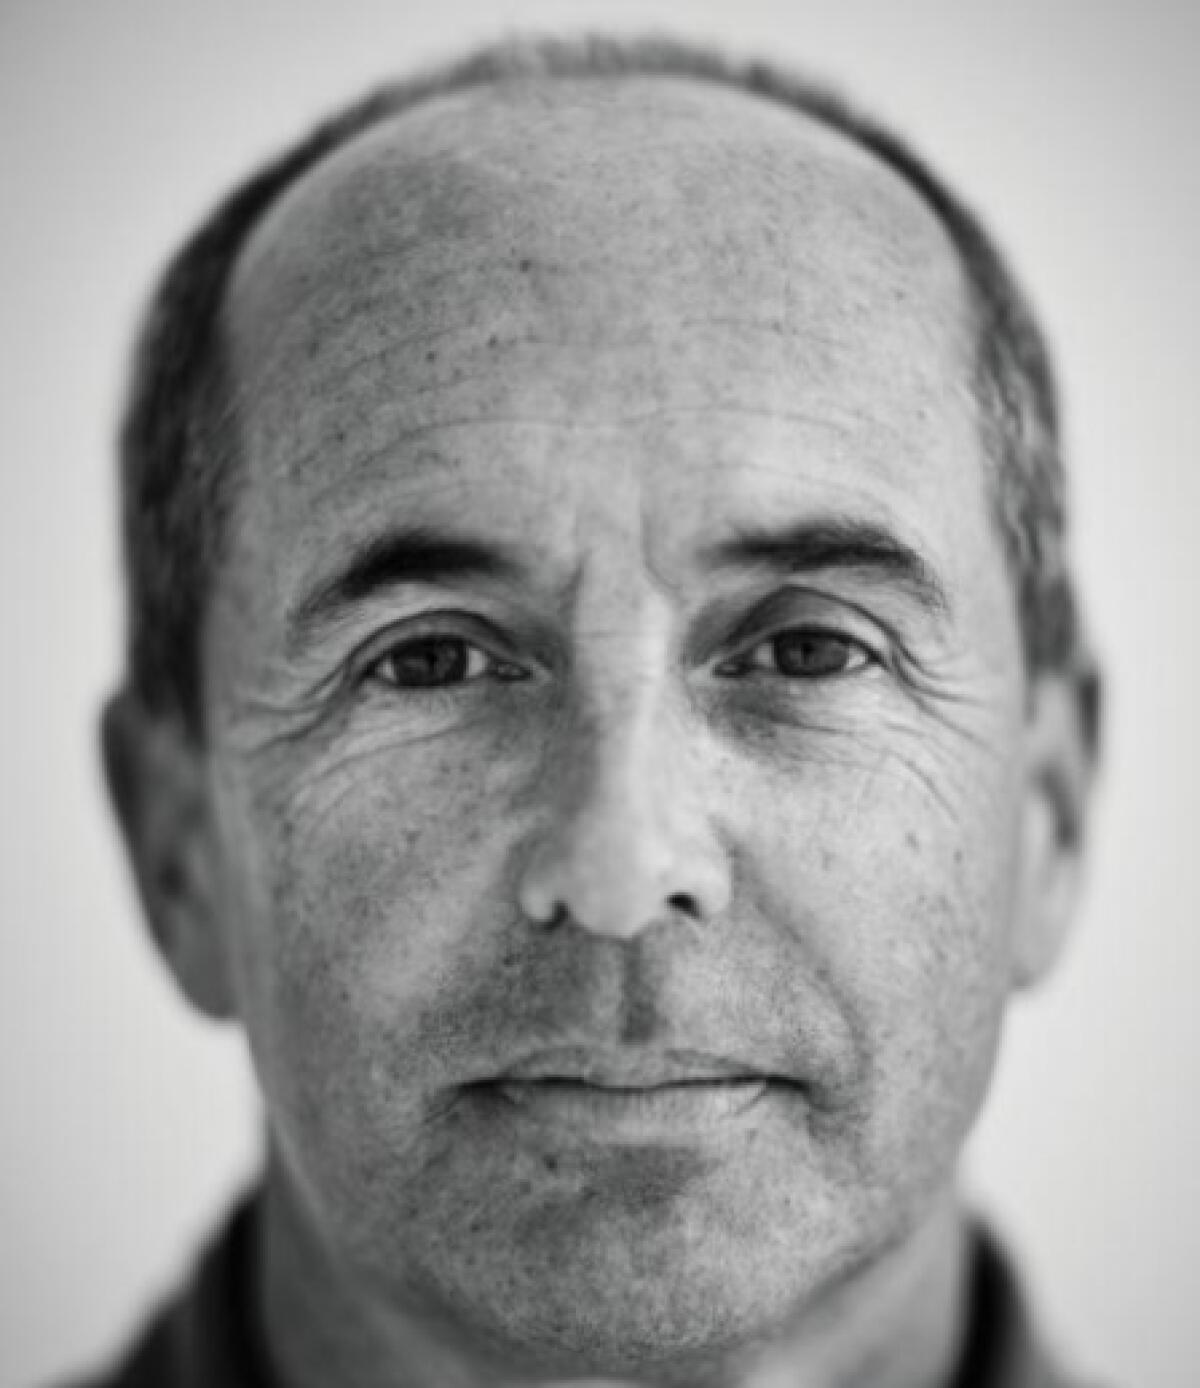 Author Don Winslow will discuss his book “City in Ruins” on Wednesday, April 10, at Warwick’s bookstore in La Jolla.